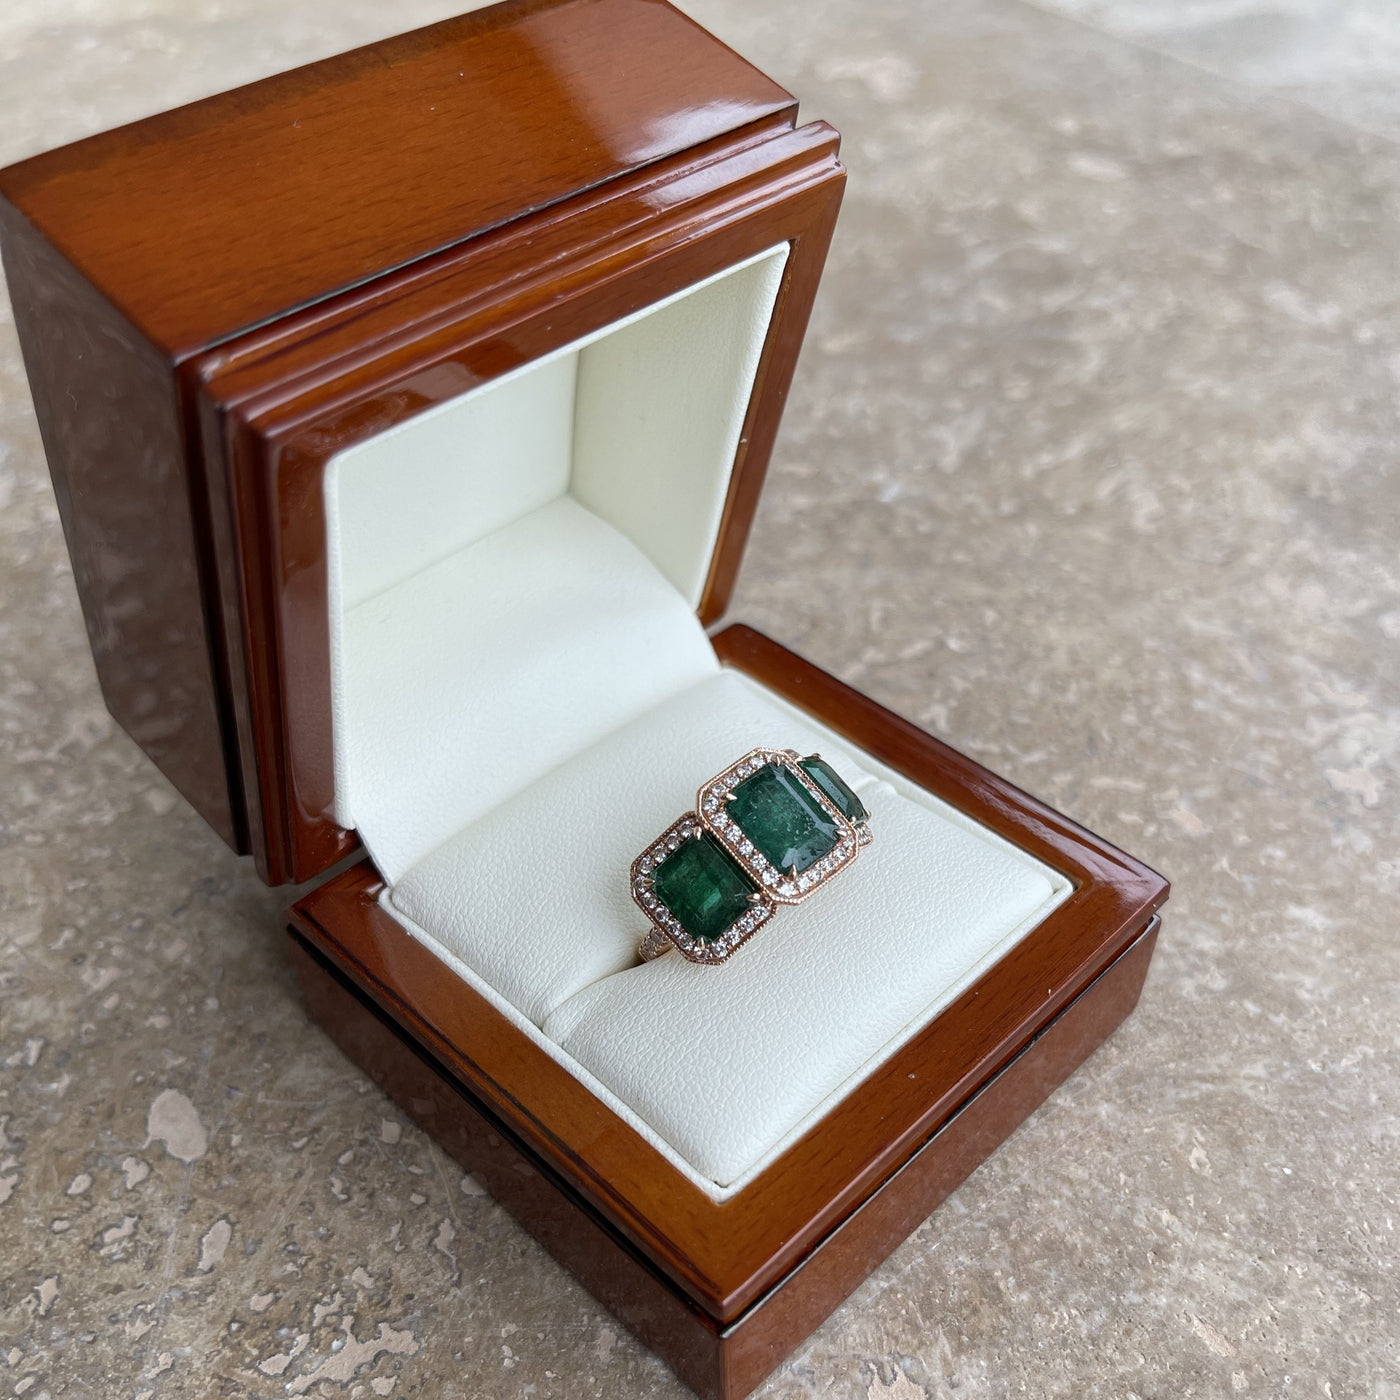 18CT Rose Gold Trilogy Emerald and Diamond Ring